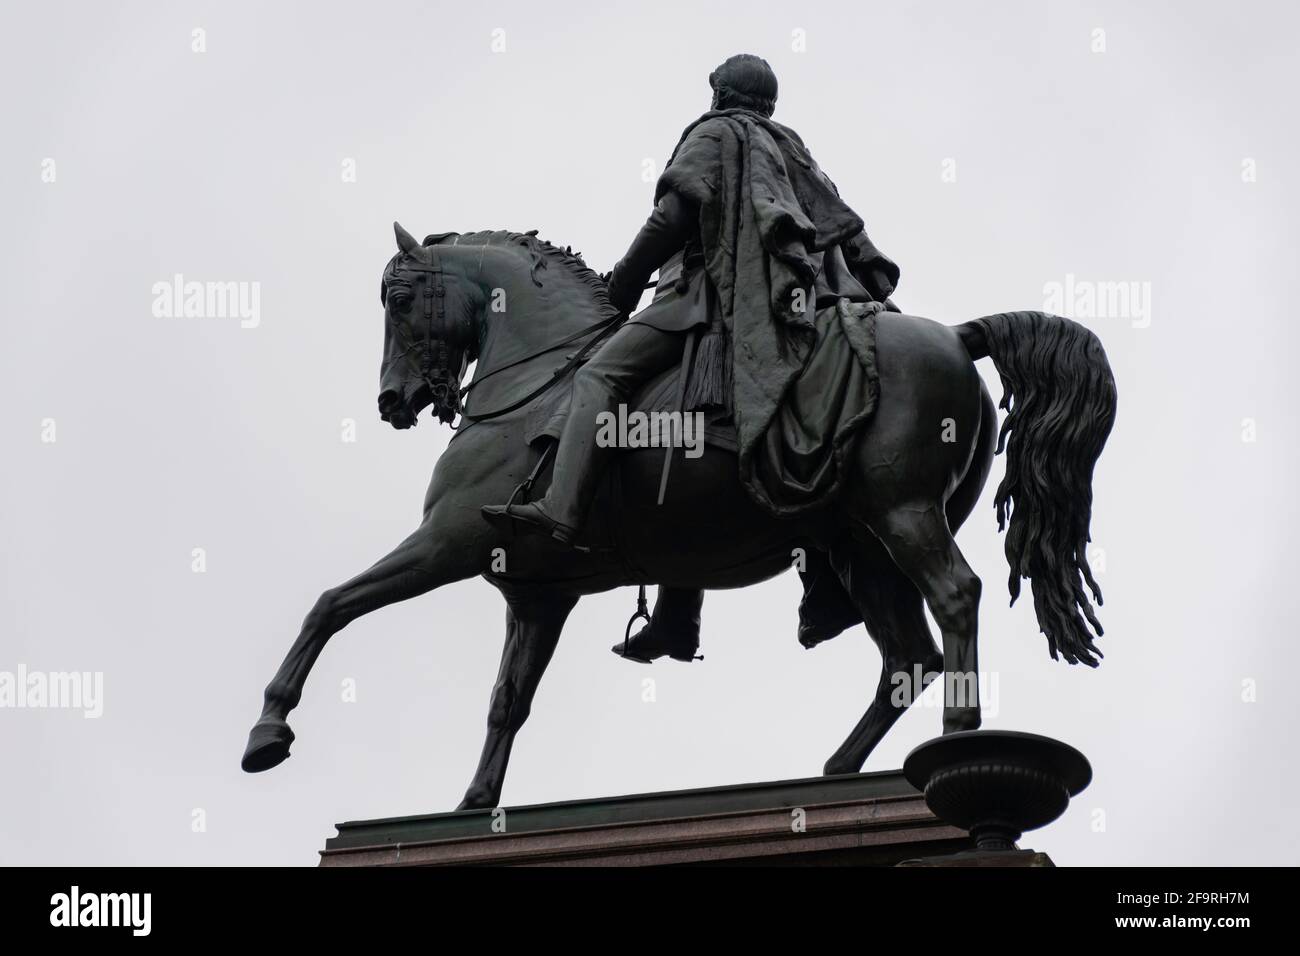 13 May 2019 Berlin, Germany - Equestrian statue of Friedrich Wilhelm IV at the portico of the Old National Gallery in Berlin, Germany Stock Photo